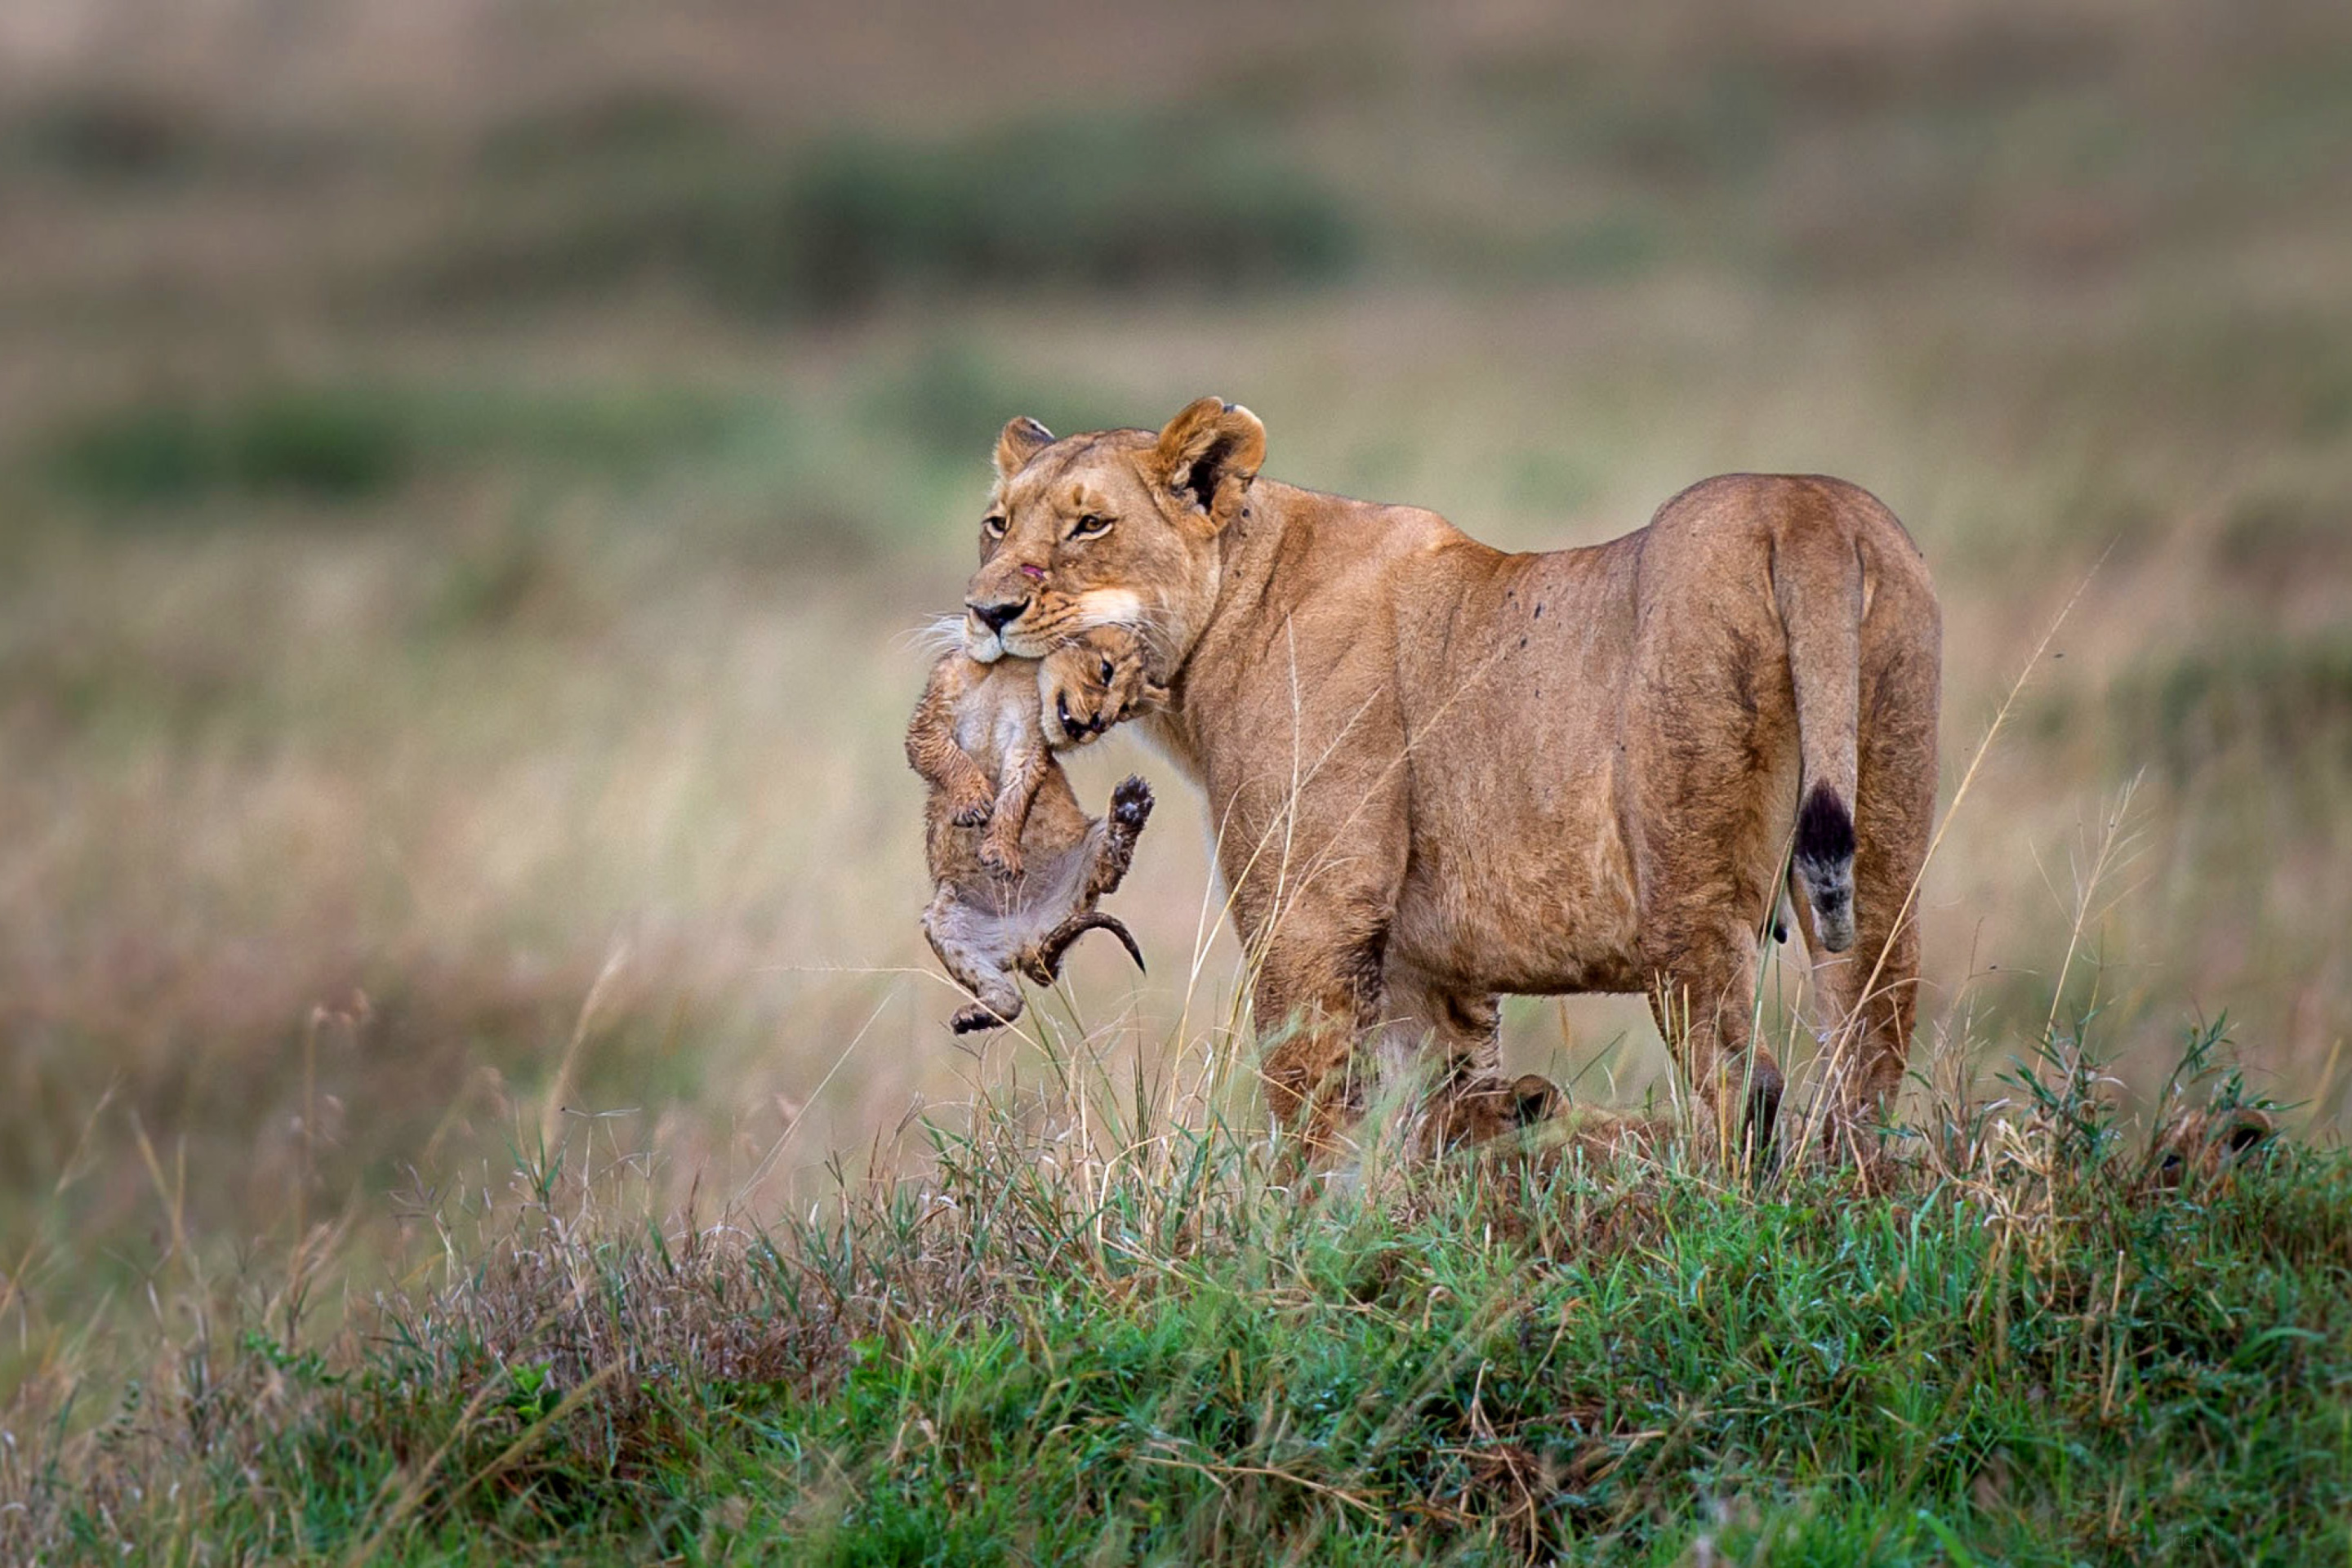 Lioness with lion cubs screenshot #1 2880x1920